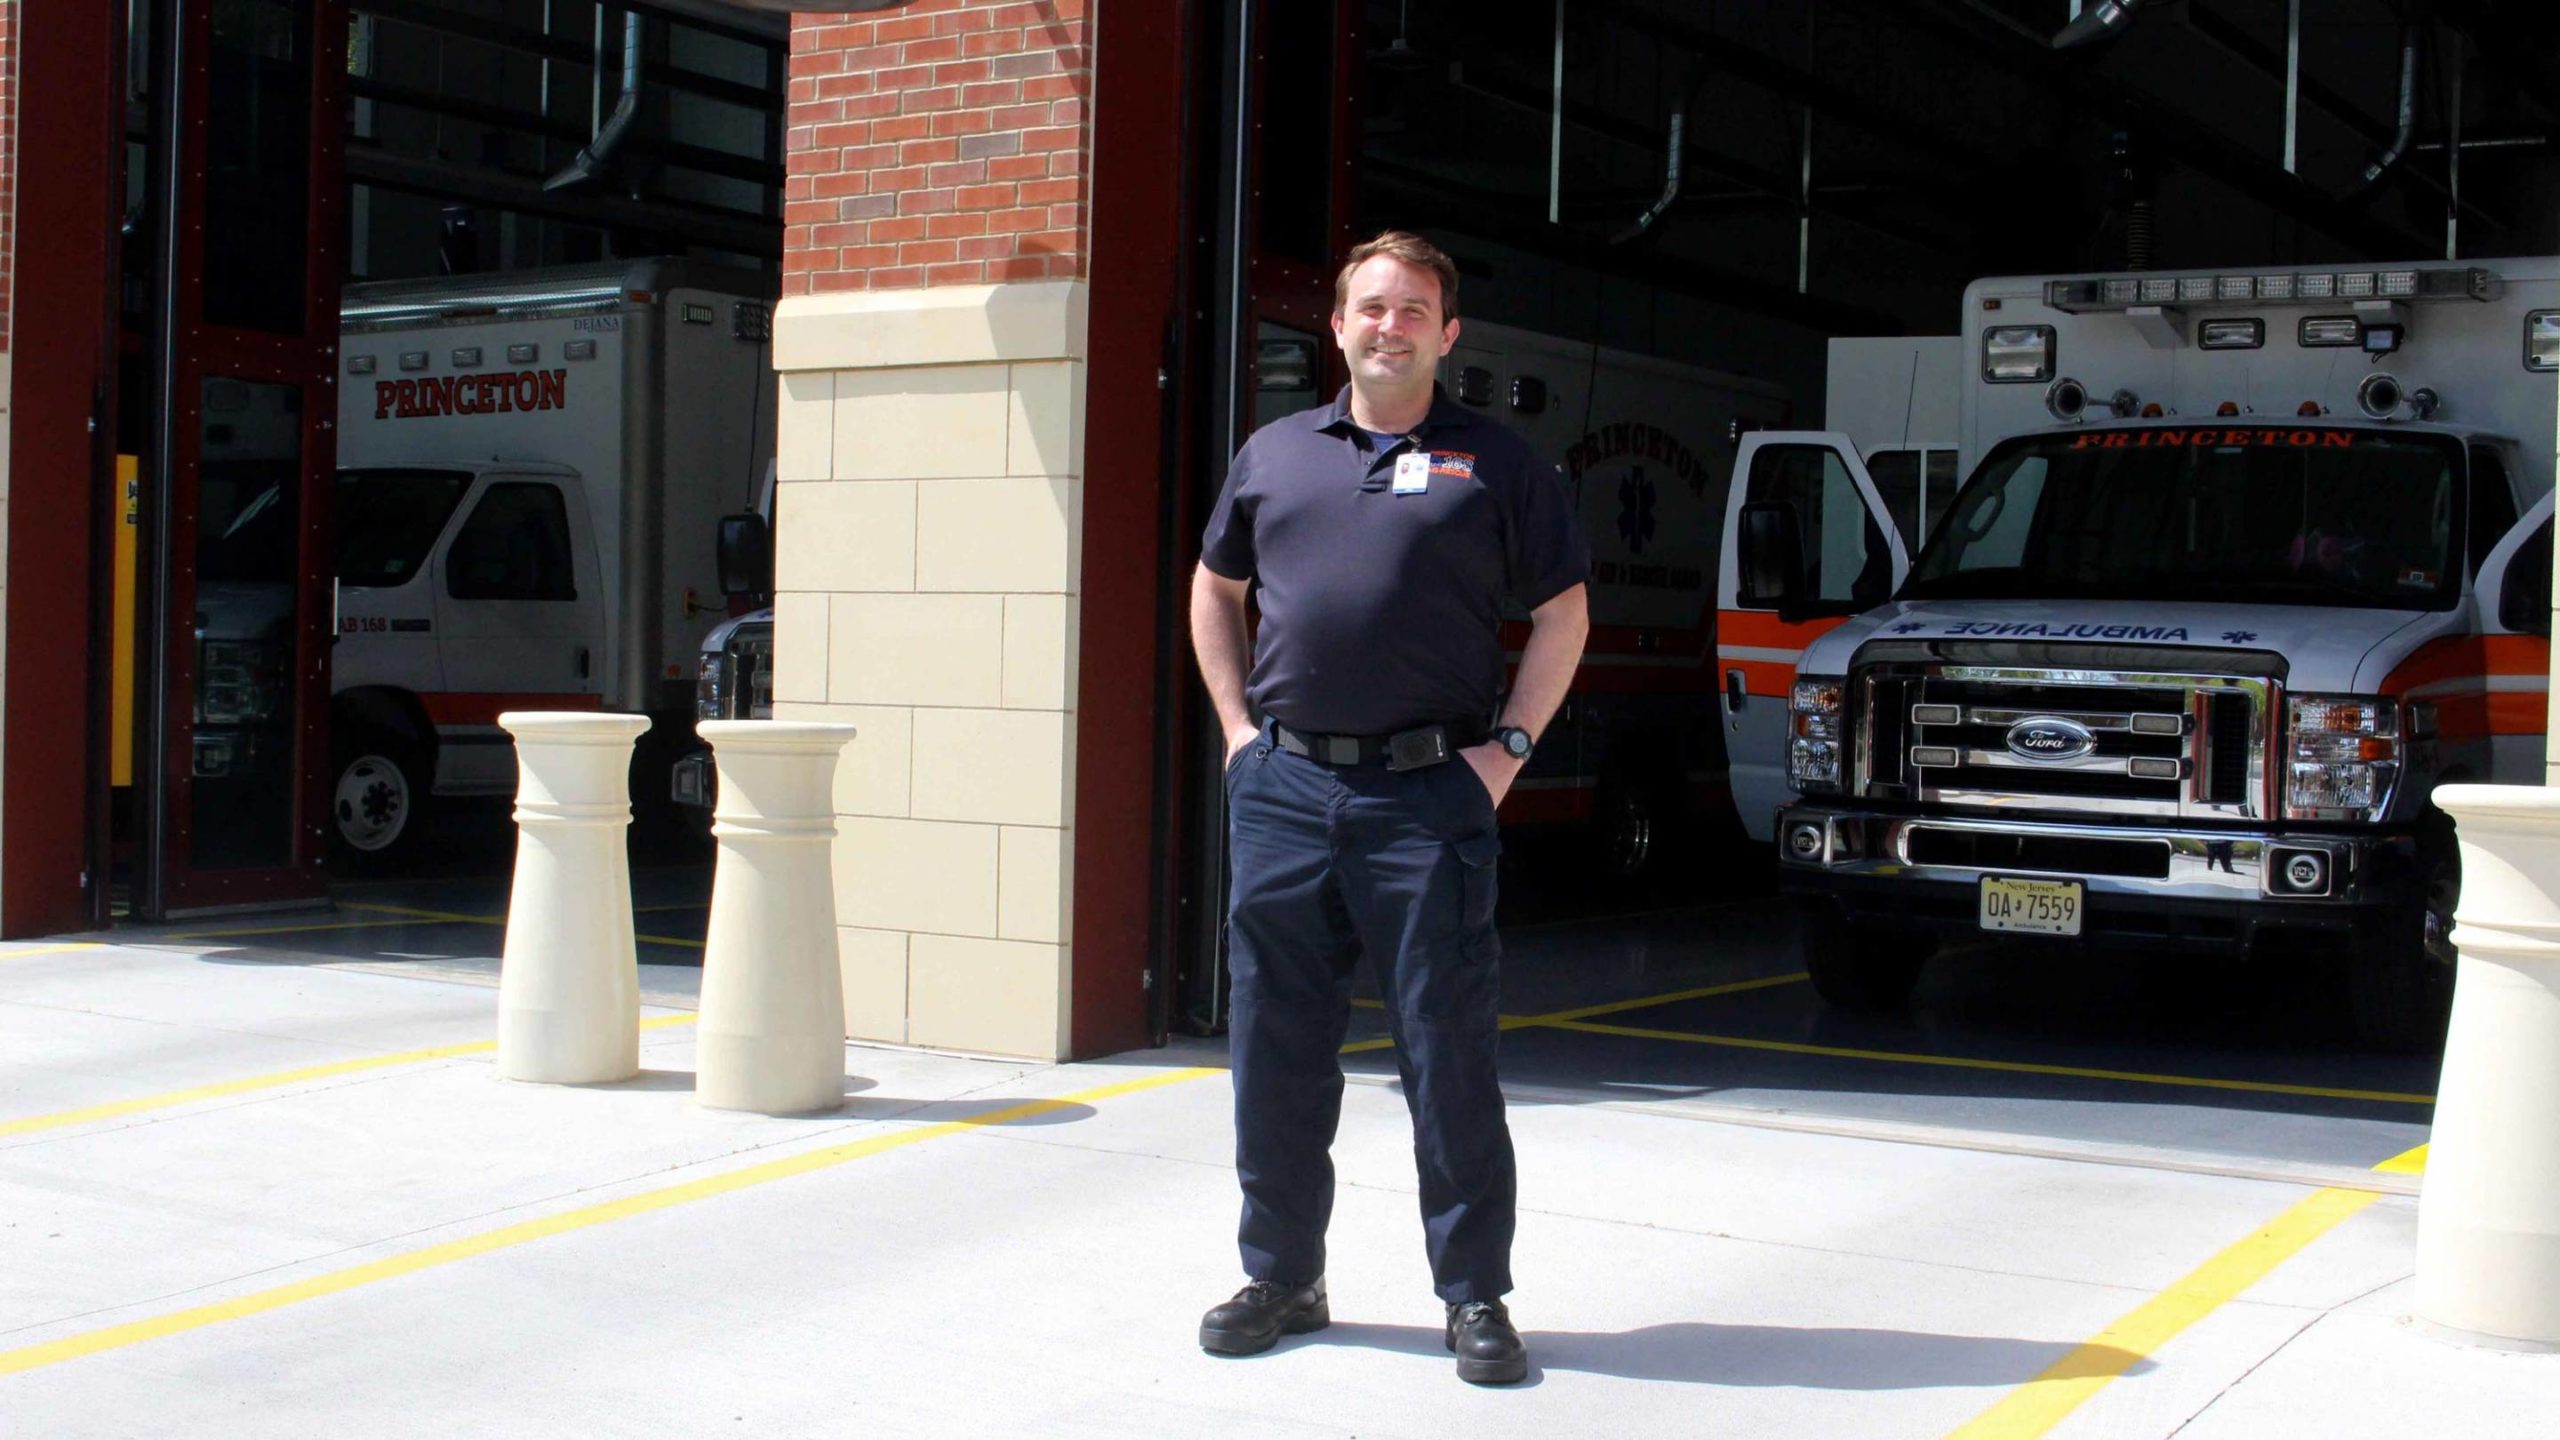 From lab to ambulance, training pays off for EMT volunteer